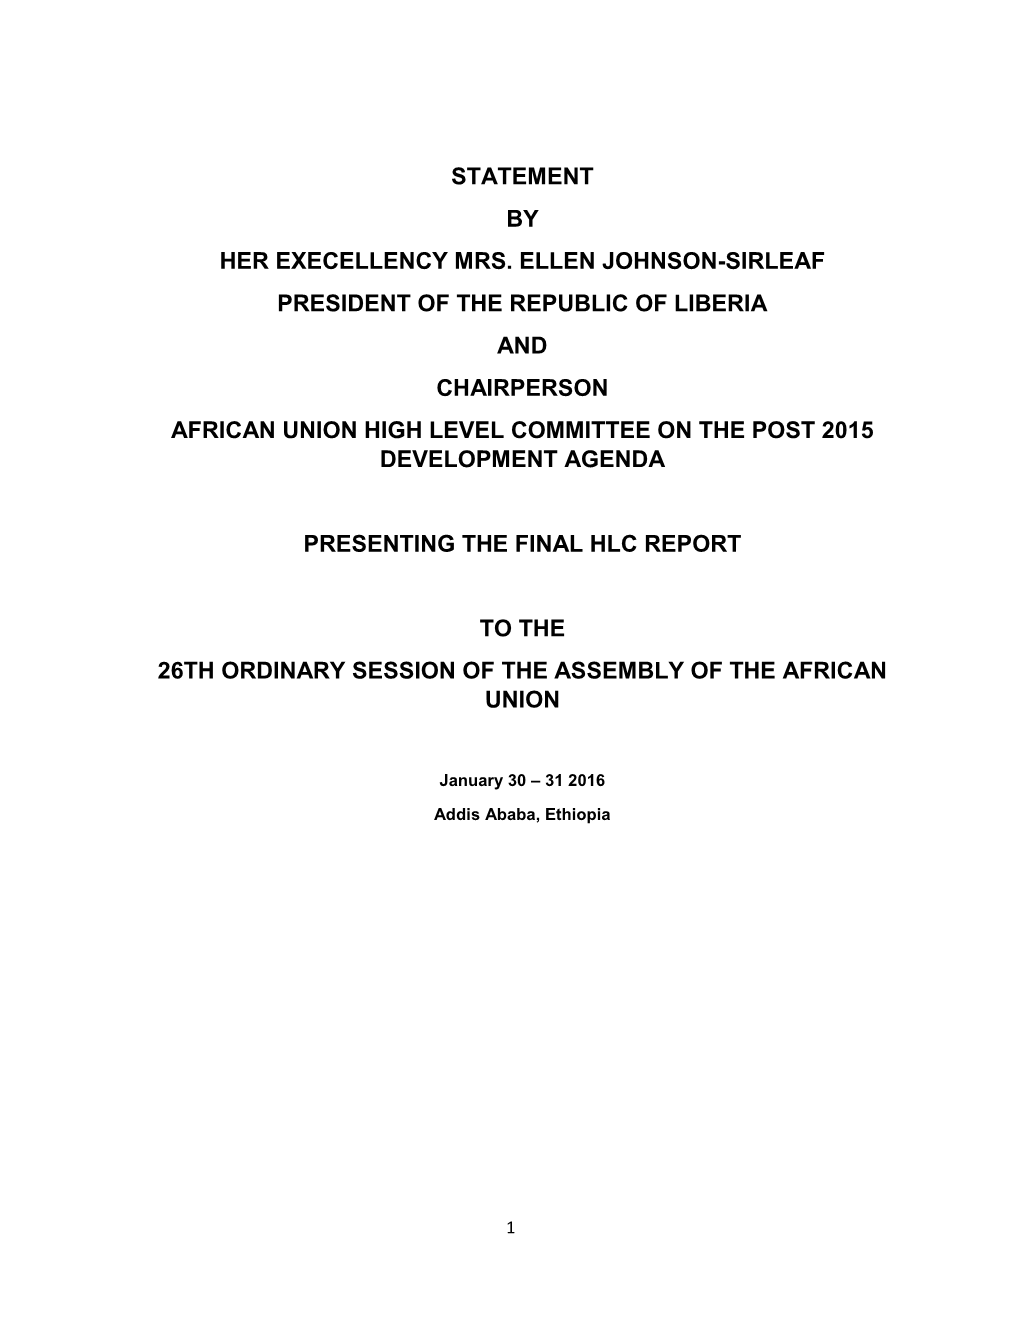 Statement by Her Execellency Mrs. Ellen Johnson-Sirleaf President of the Republic of Liberia and Chairperson African Union High